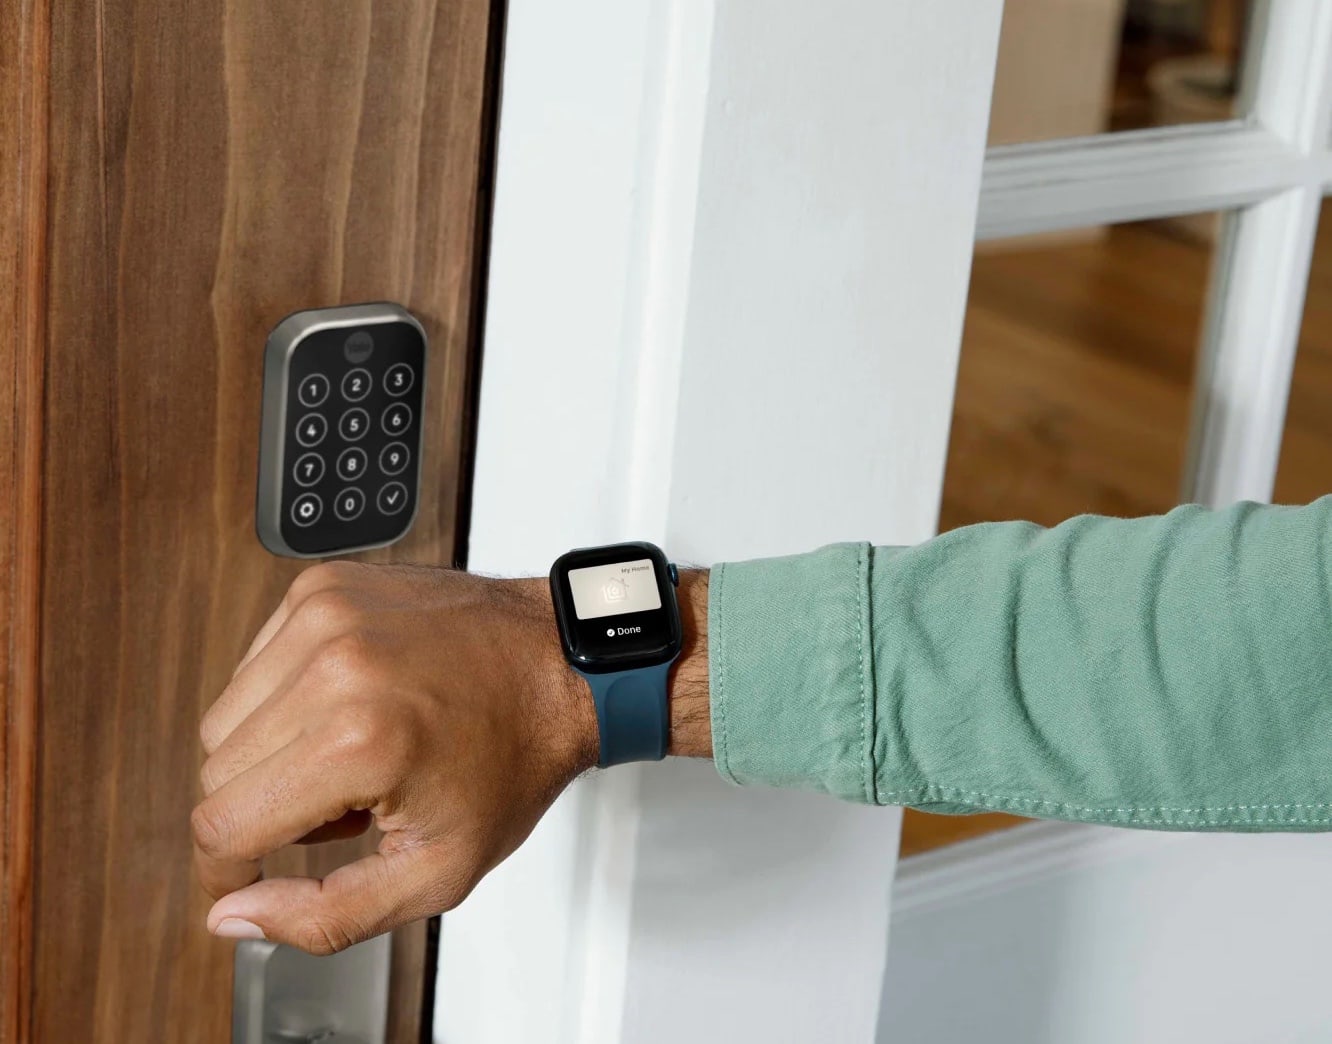 With Home Key, you can use your iPhone or Apple Watch to unlock the lock.